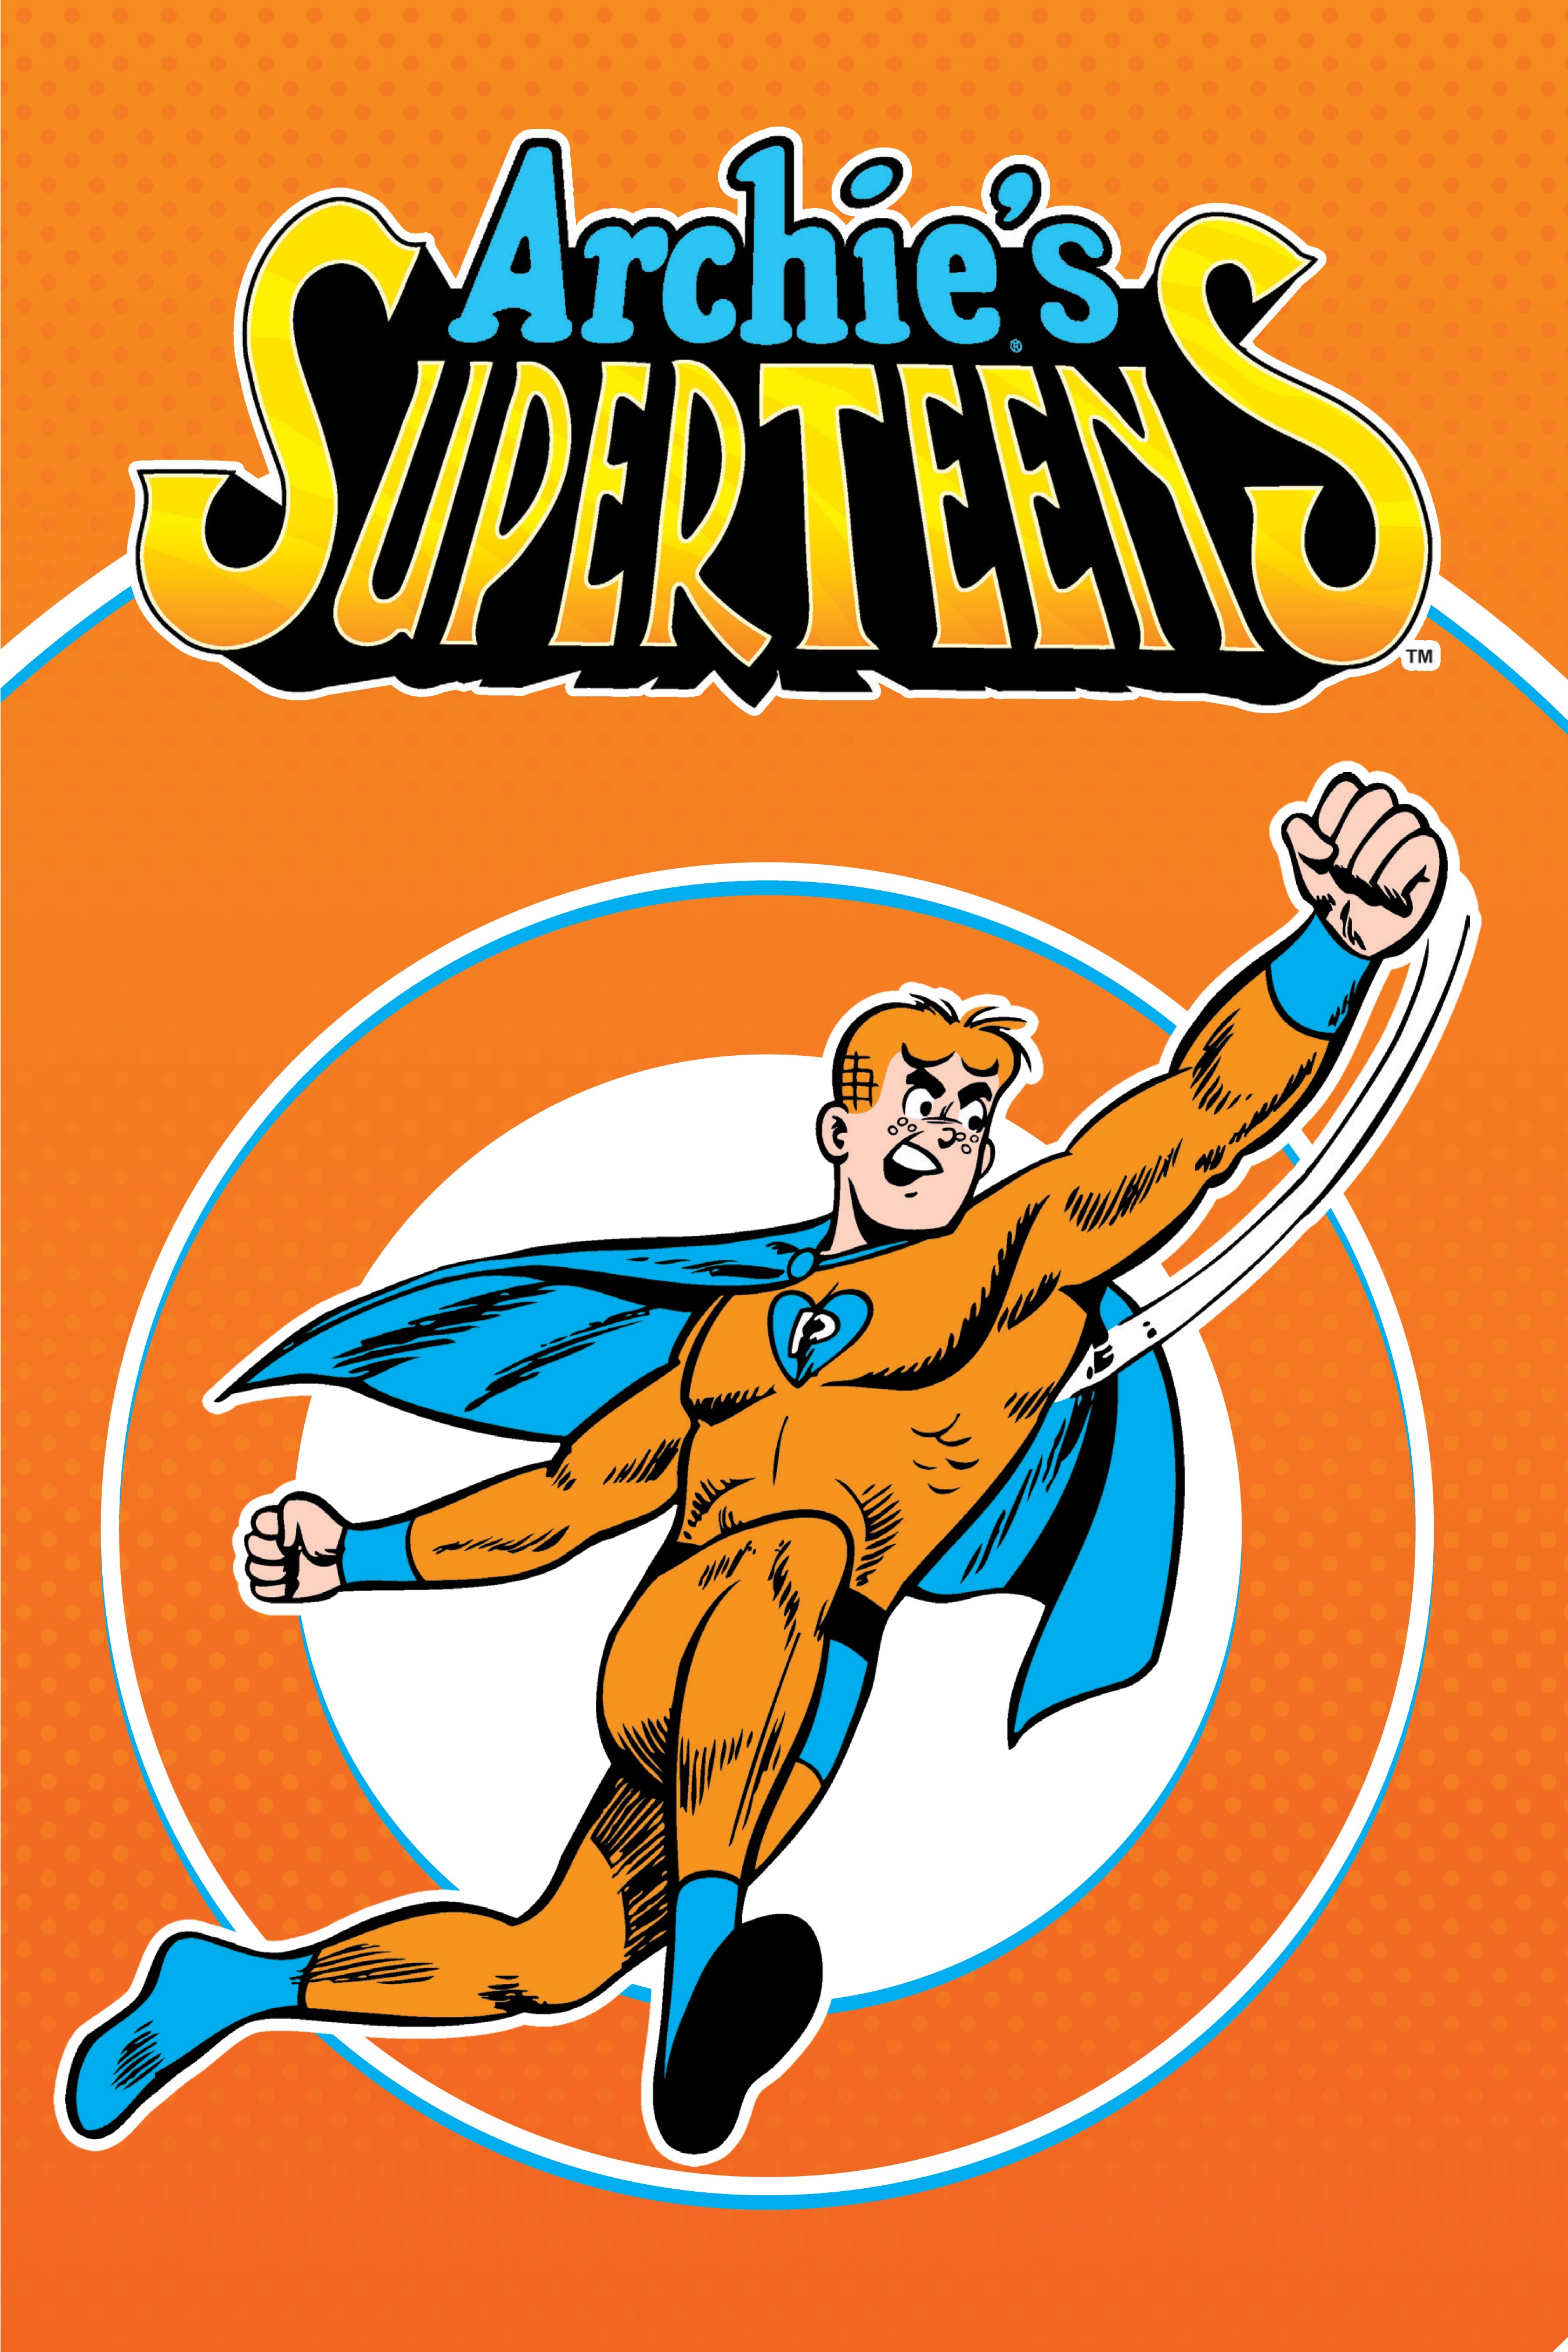 Read online Archie's Superteens comic -  Issue # TPB - 2